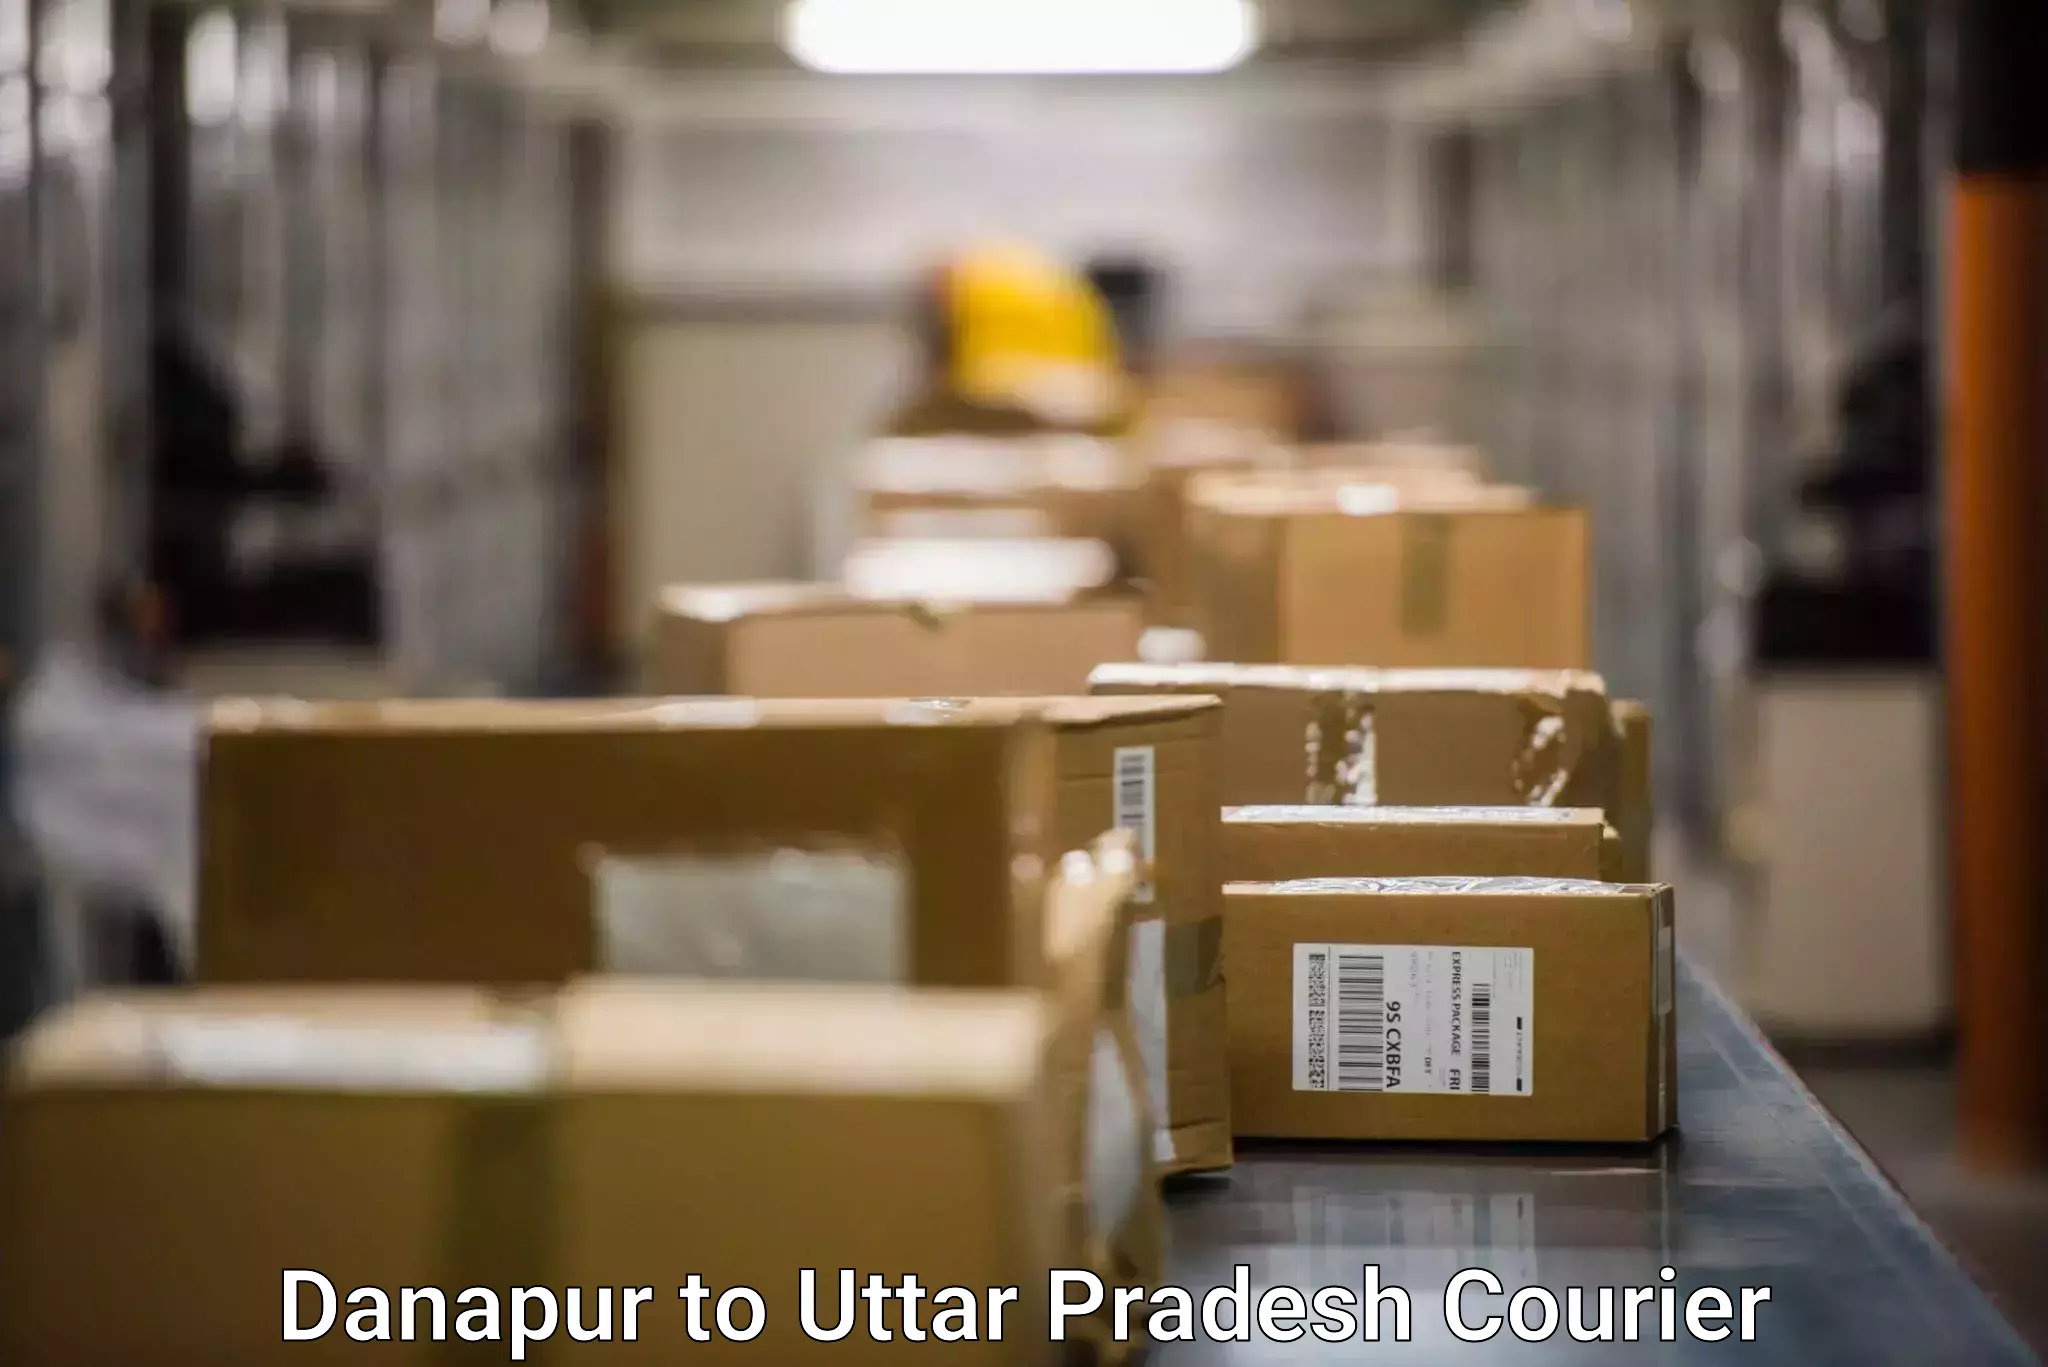 Expedited parcel delivery Danapur to Lakhimpur